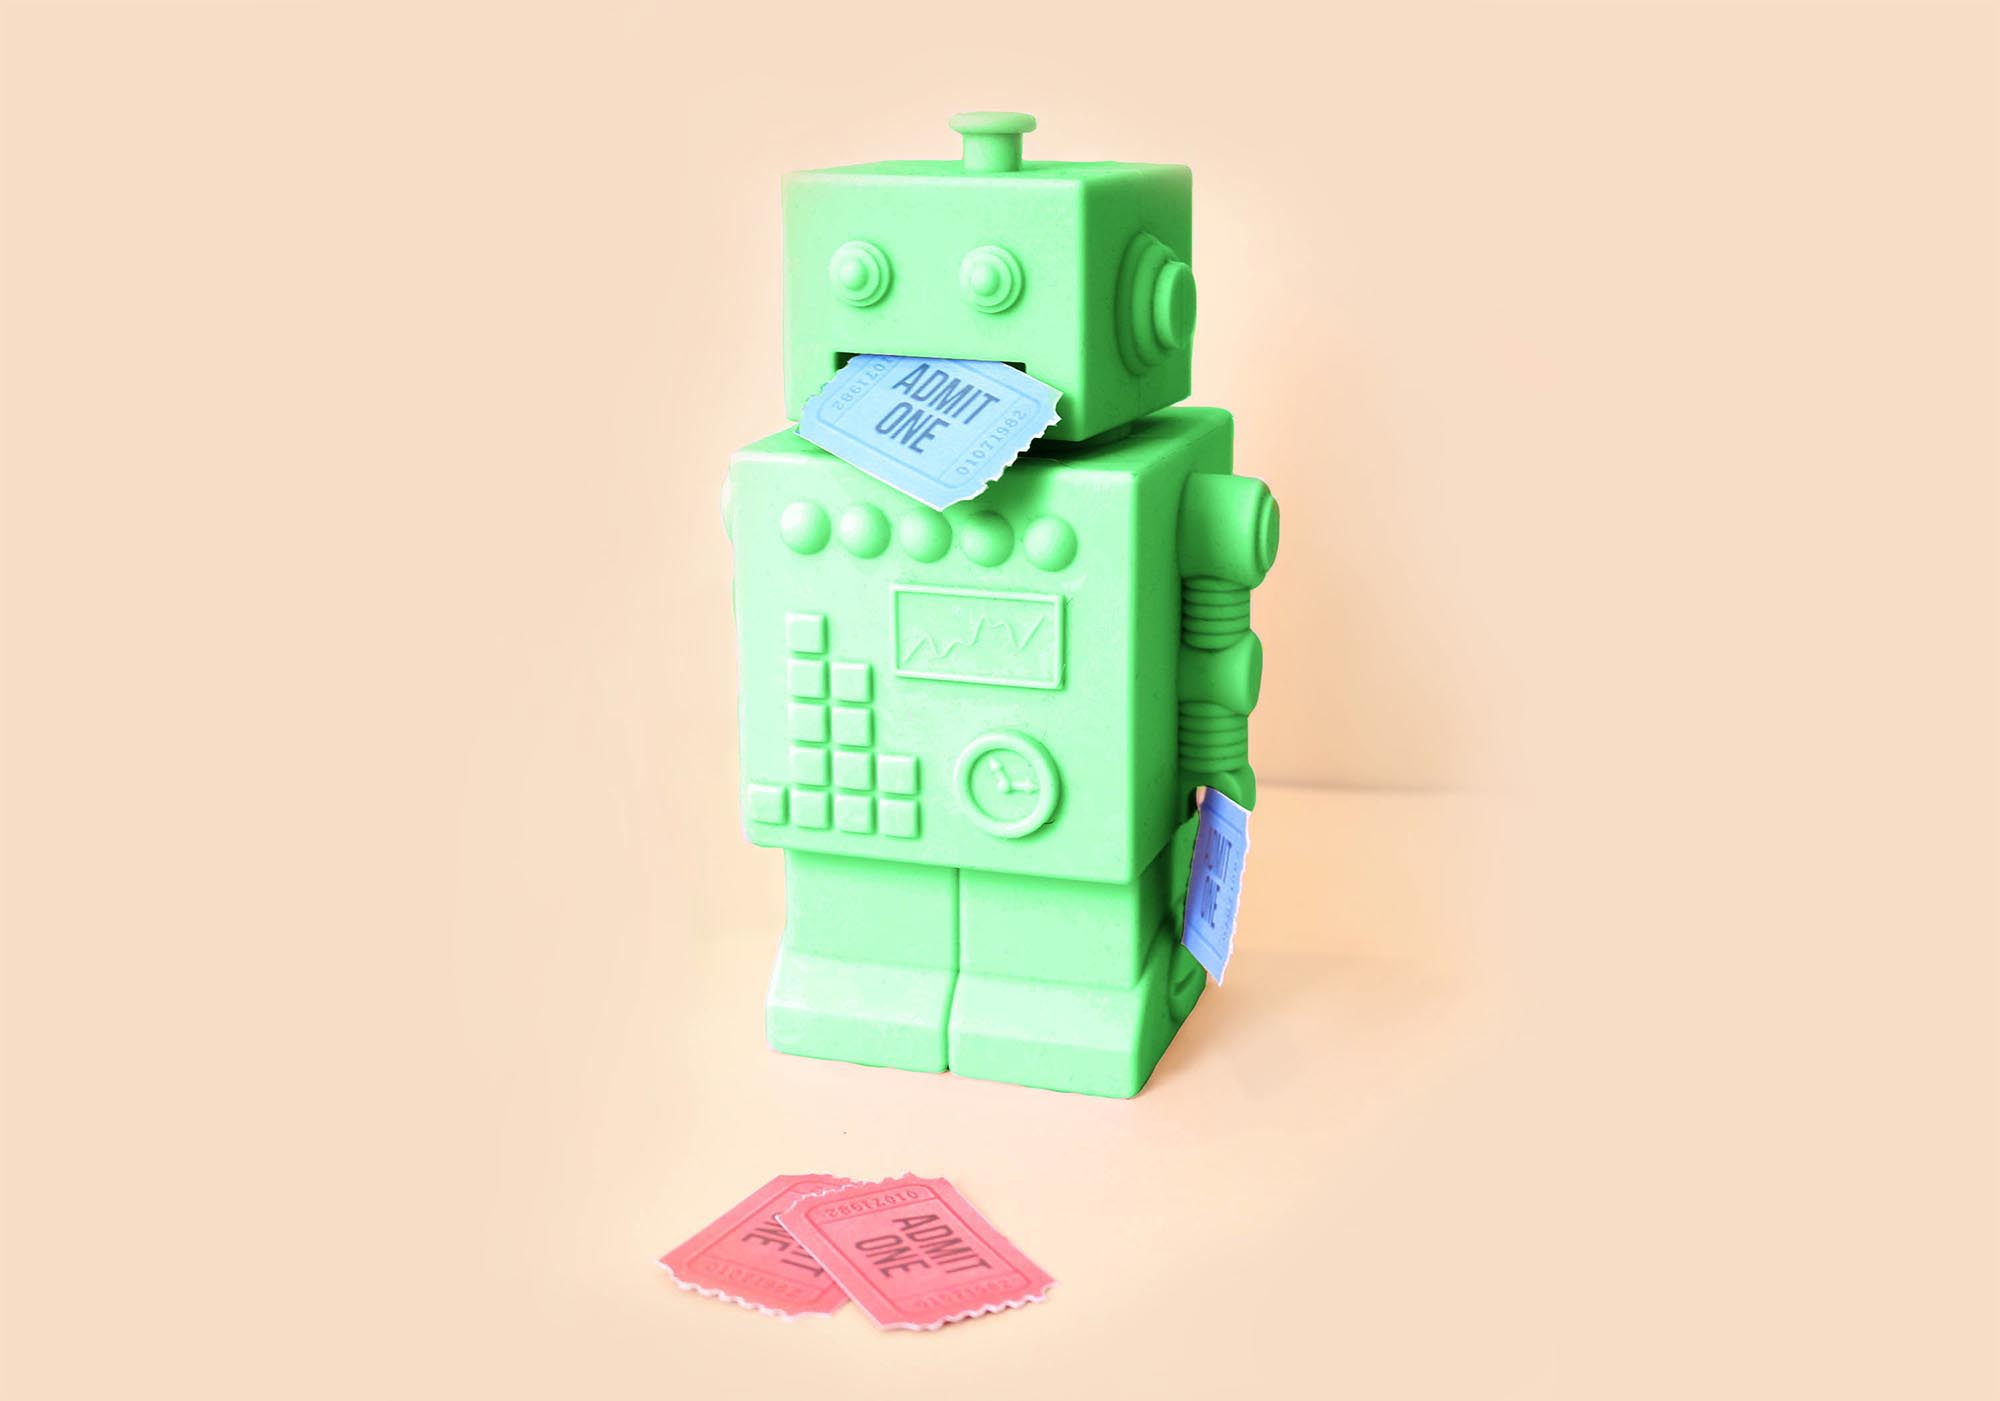 Green ticket bot with blue ticket in its mouth